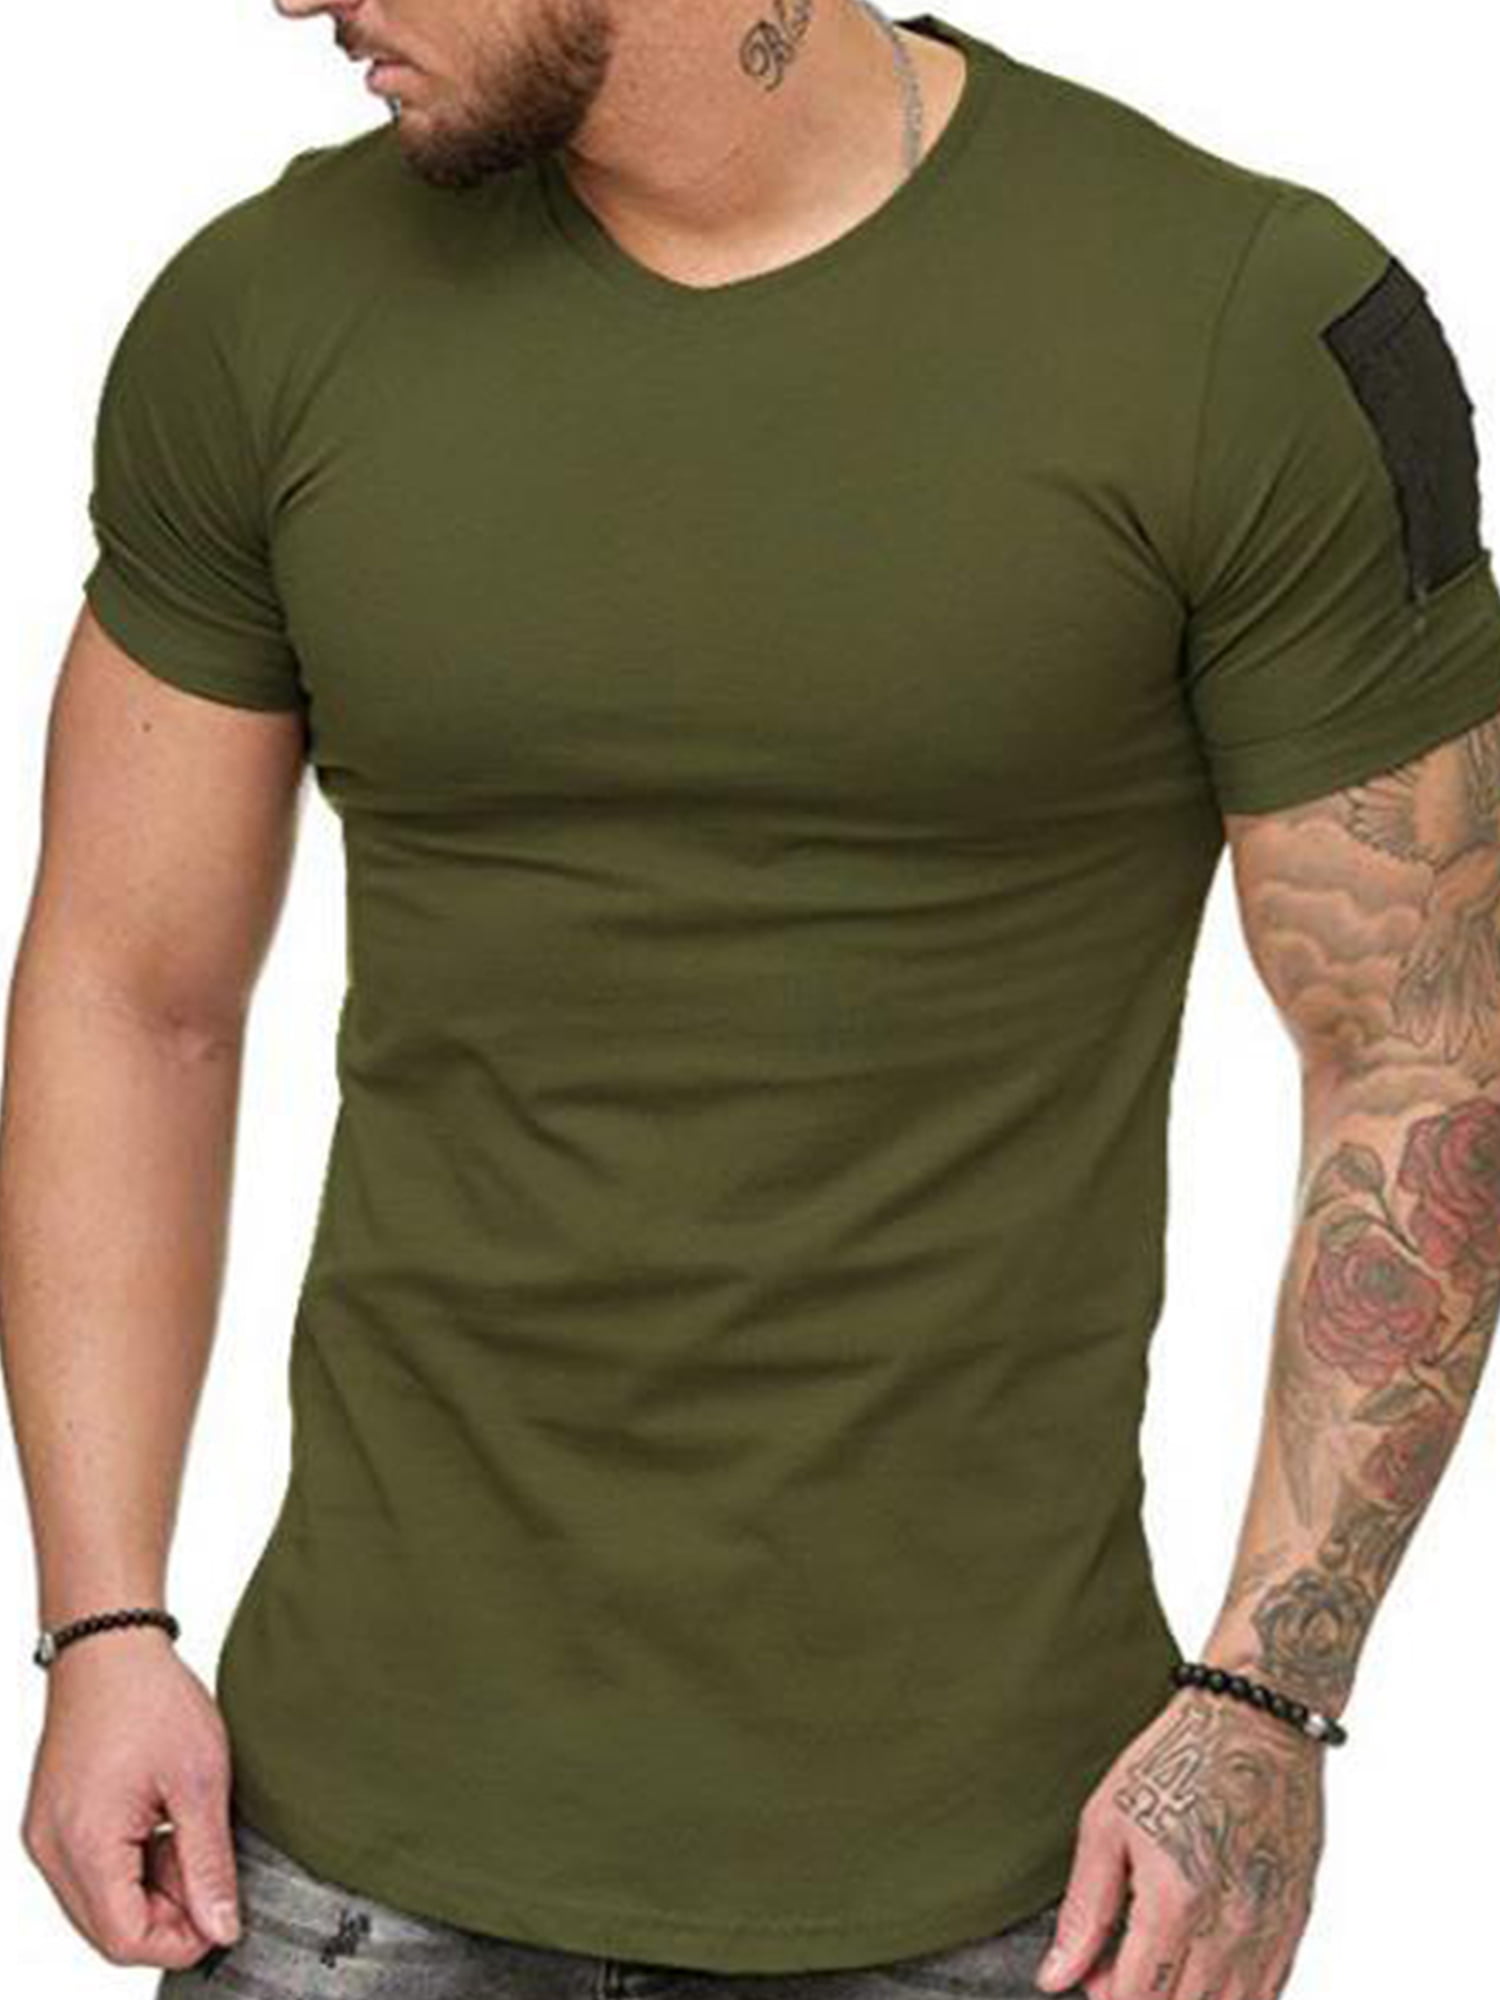 Lallc - Mens Slim Fit Short Sleeve T-Shirt Muscle Casual Blouse Top ...